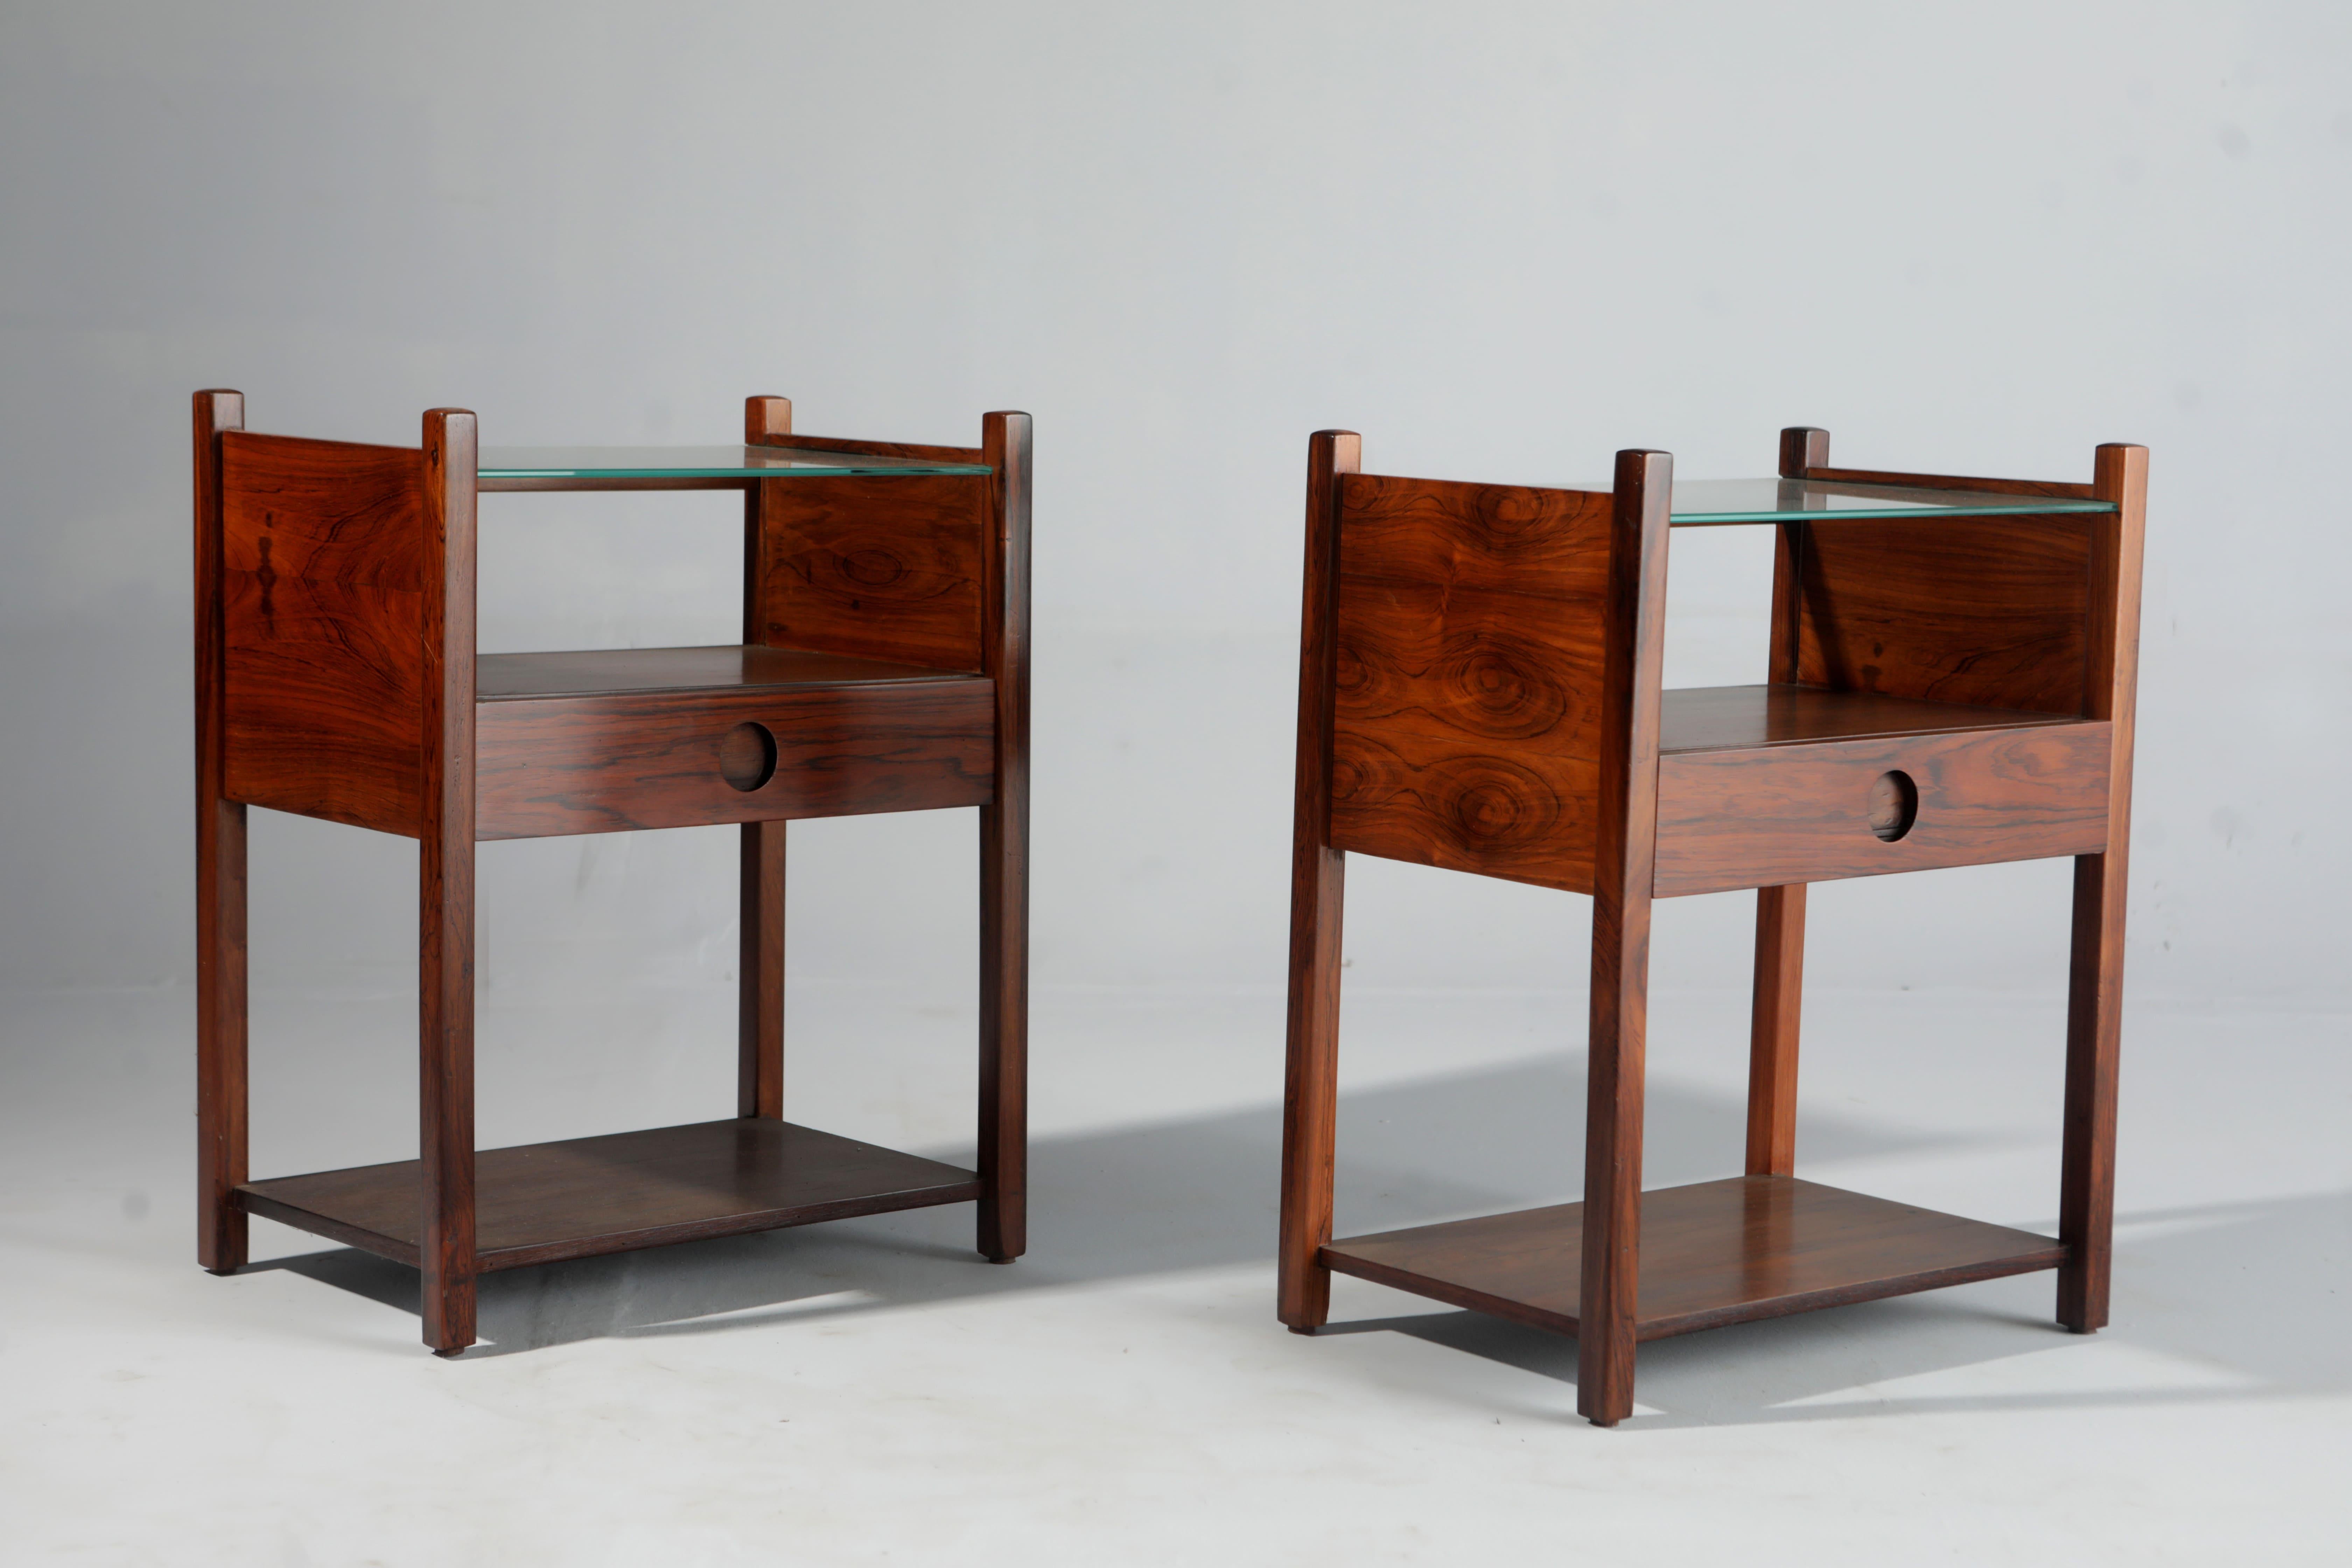 Mid-Century Modern Bedside Table “Yara“ by Brazilian Designer Sergio Rodrigues, 1960's (Set of Two)

Designed in 1965 by the acclaimed Brazilian architect and designer Sergio Rodrigues (1927 - 2014), the 